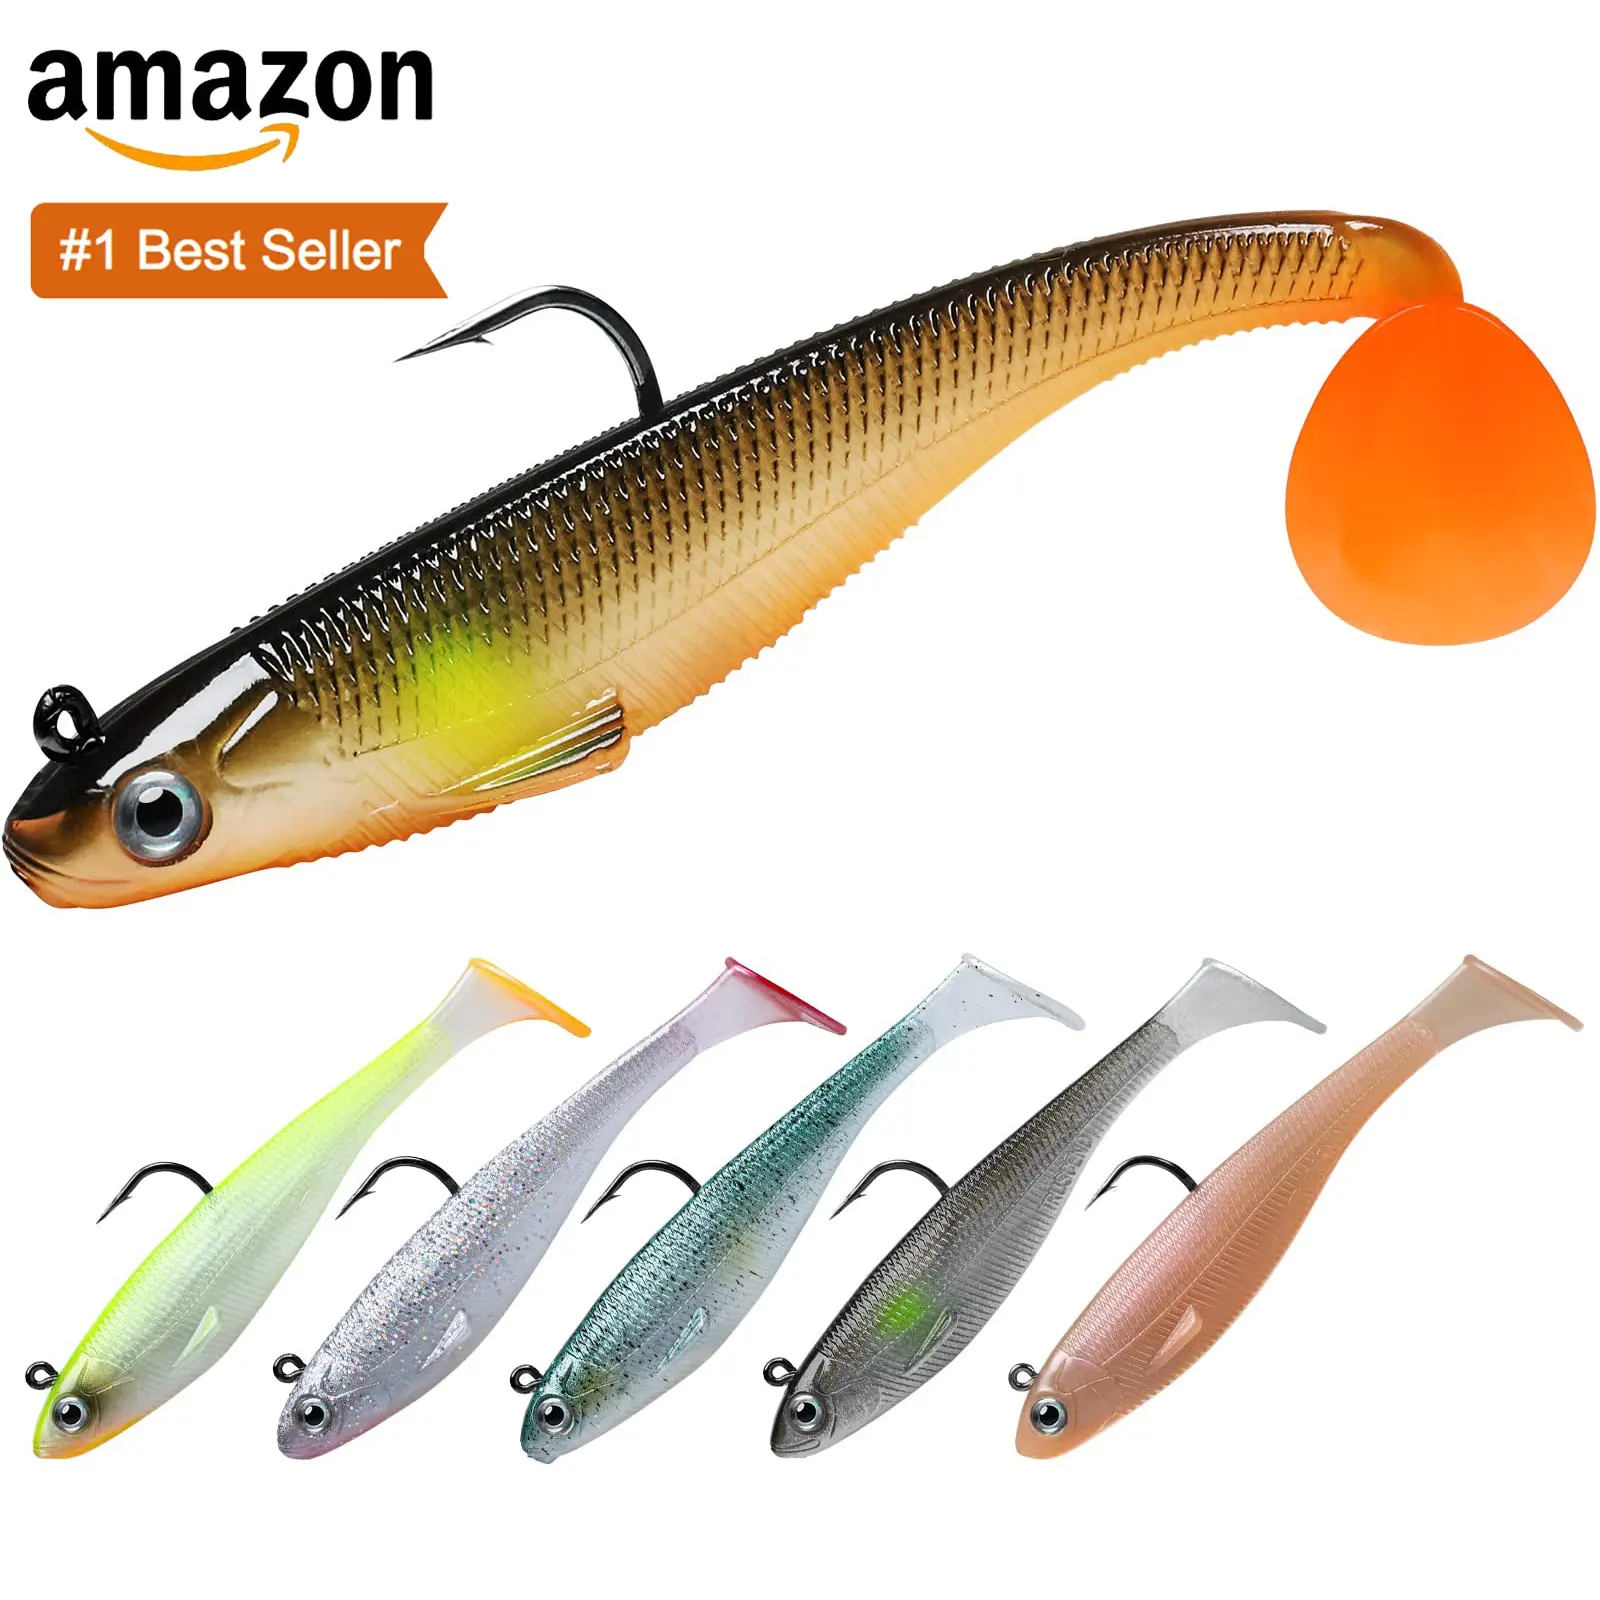 Truscend Amazon Best Seller pike carp pre rigged jig head soft paddle tail plastic artificial fishing lures bait for bass trout